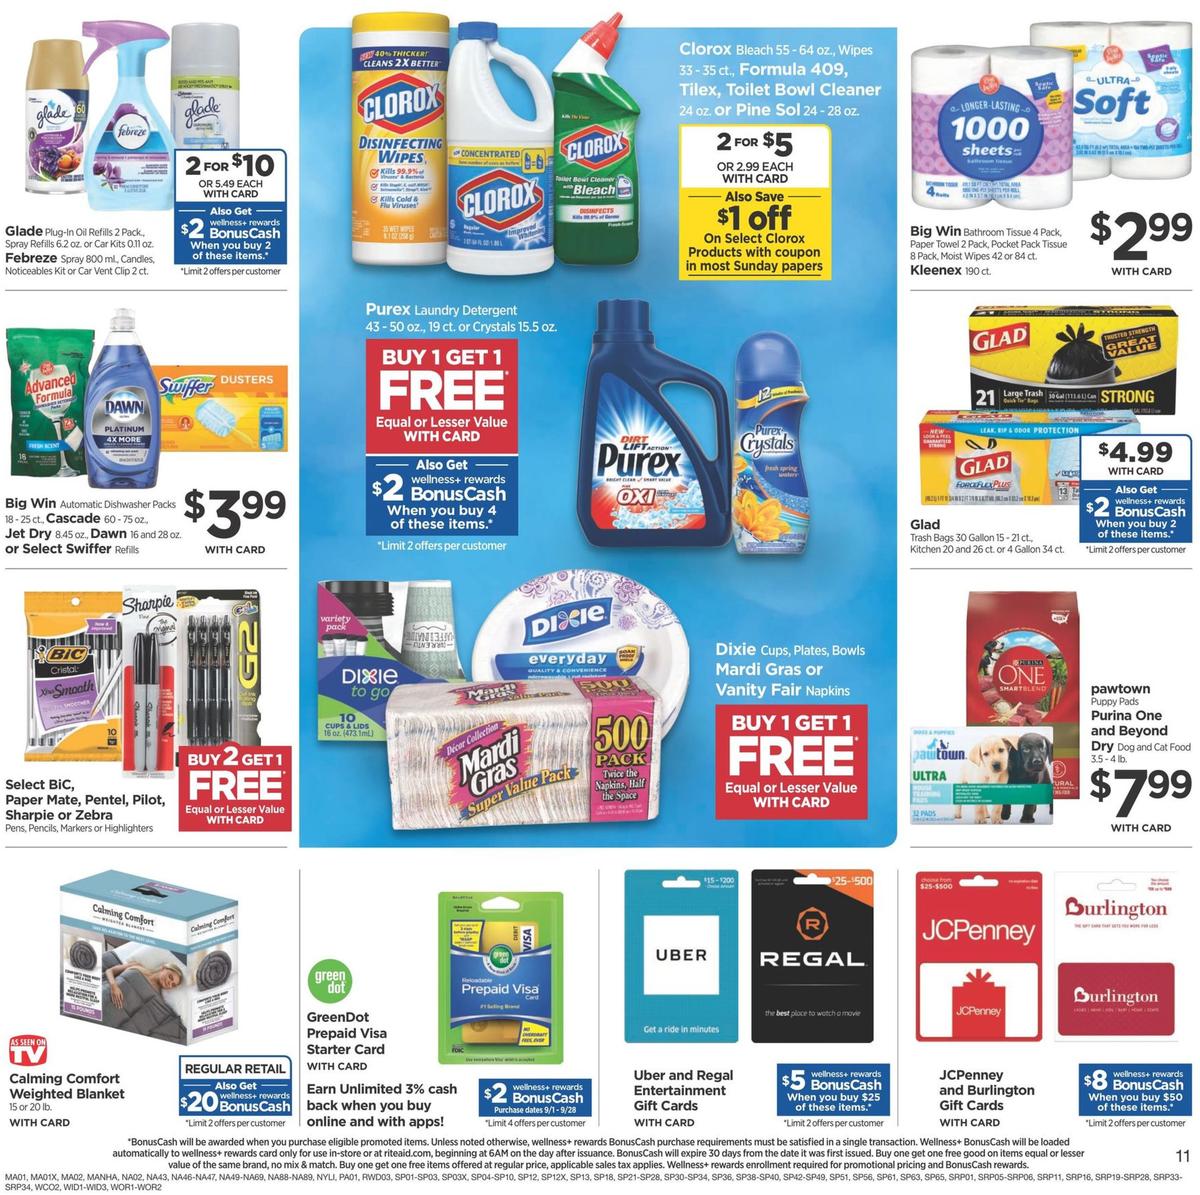 Rite Aid Weekly Ad from September 15